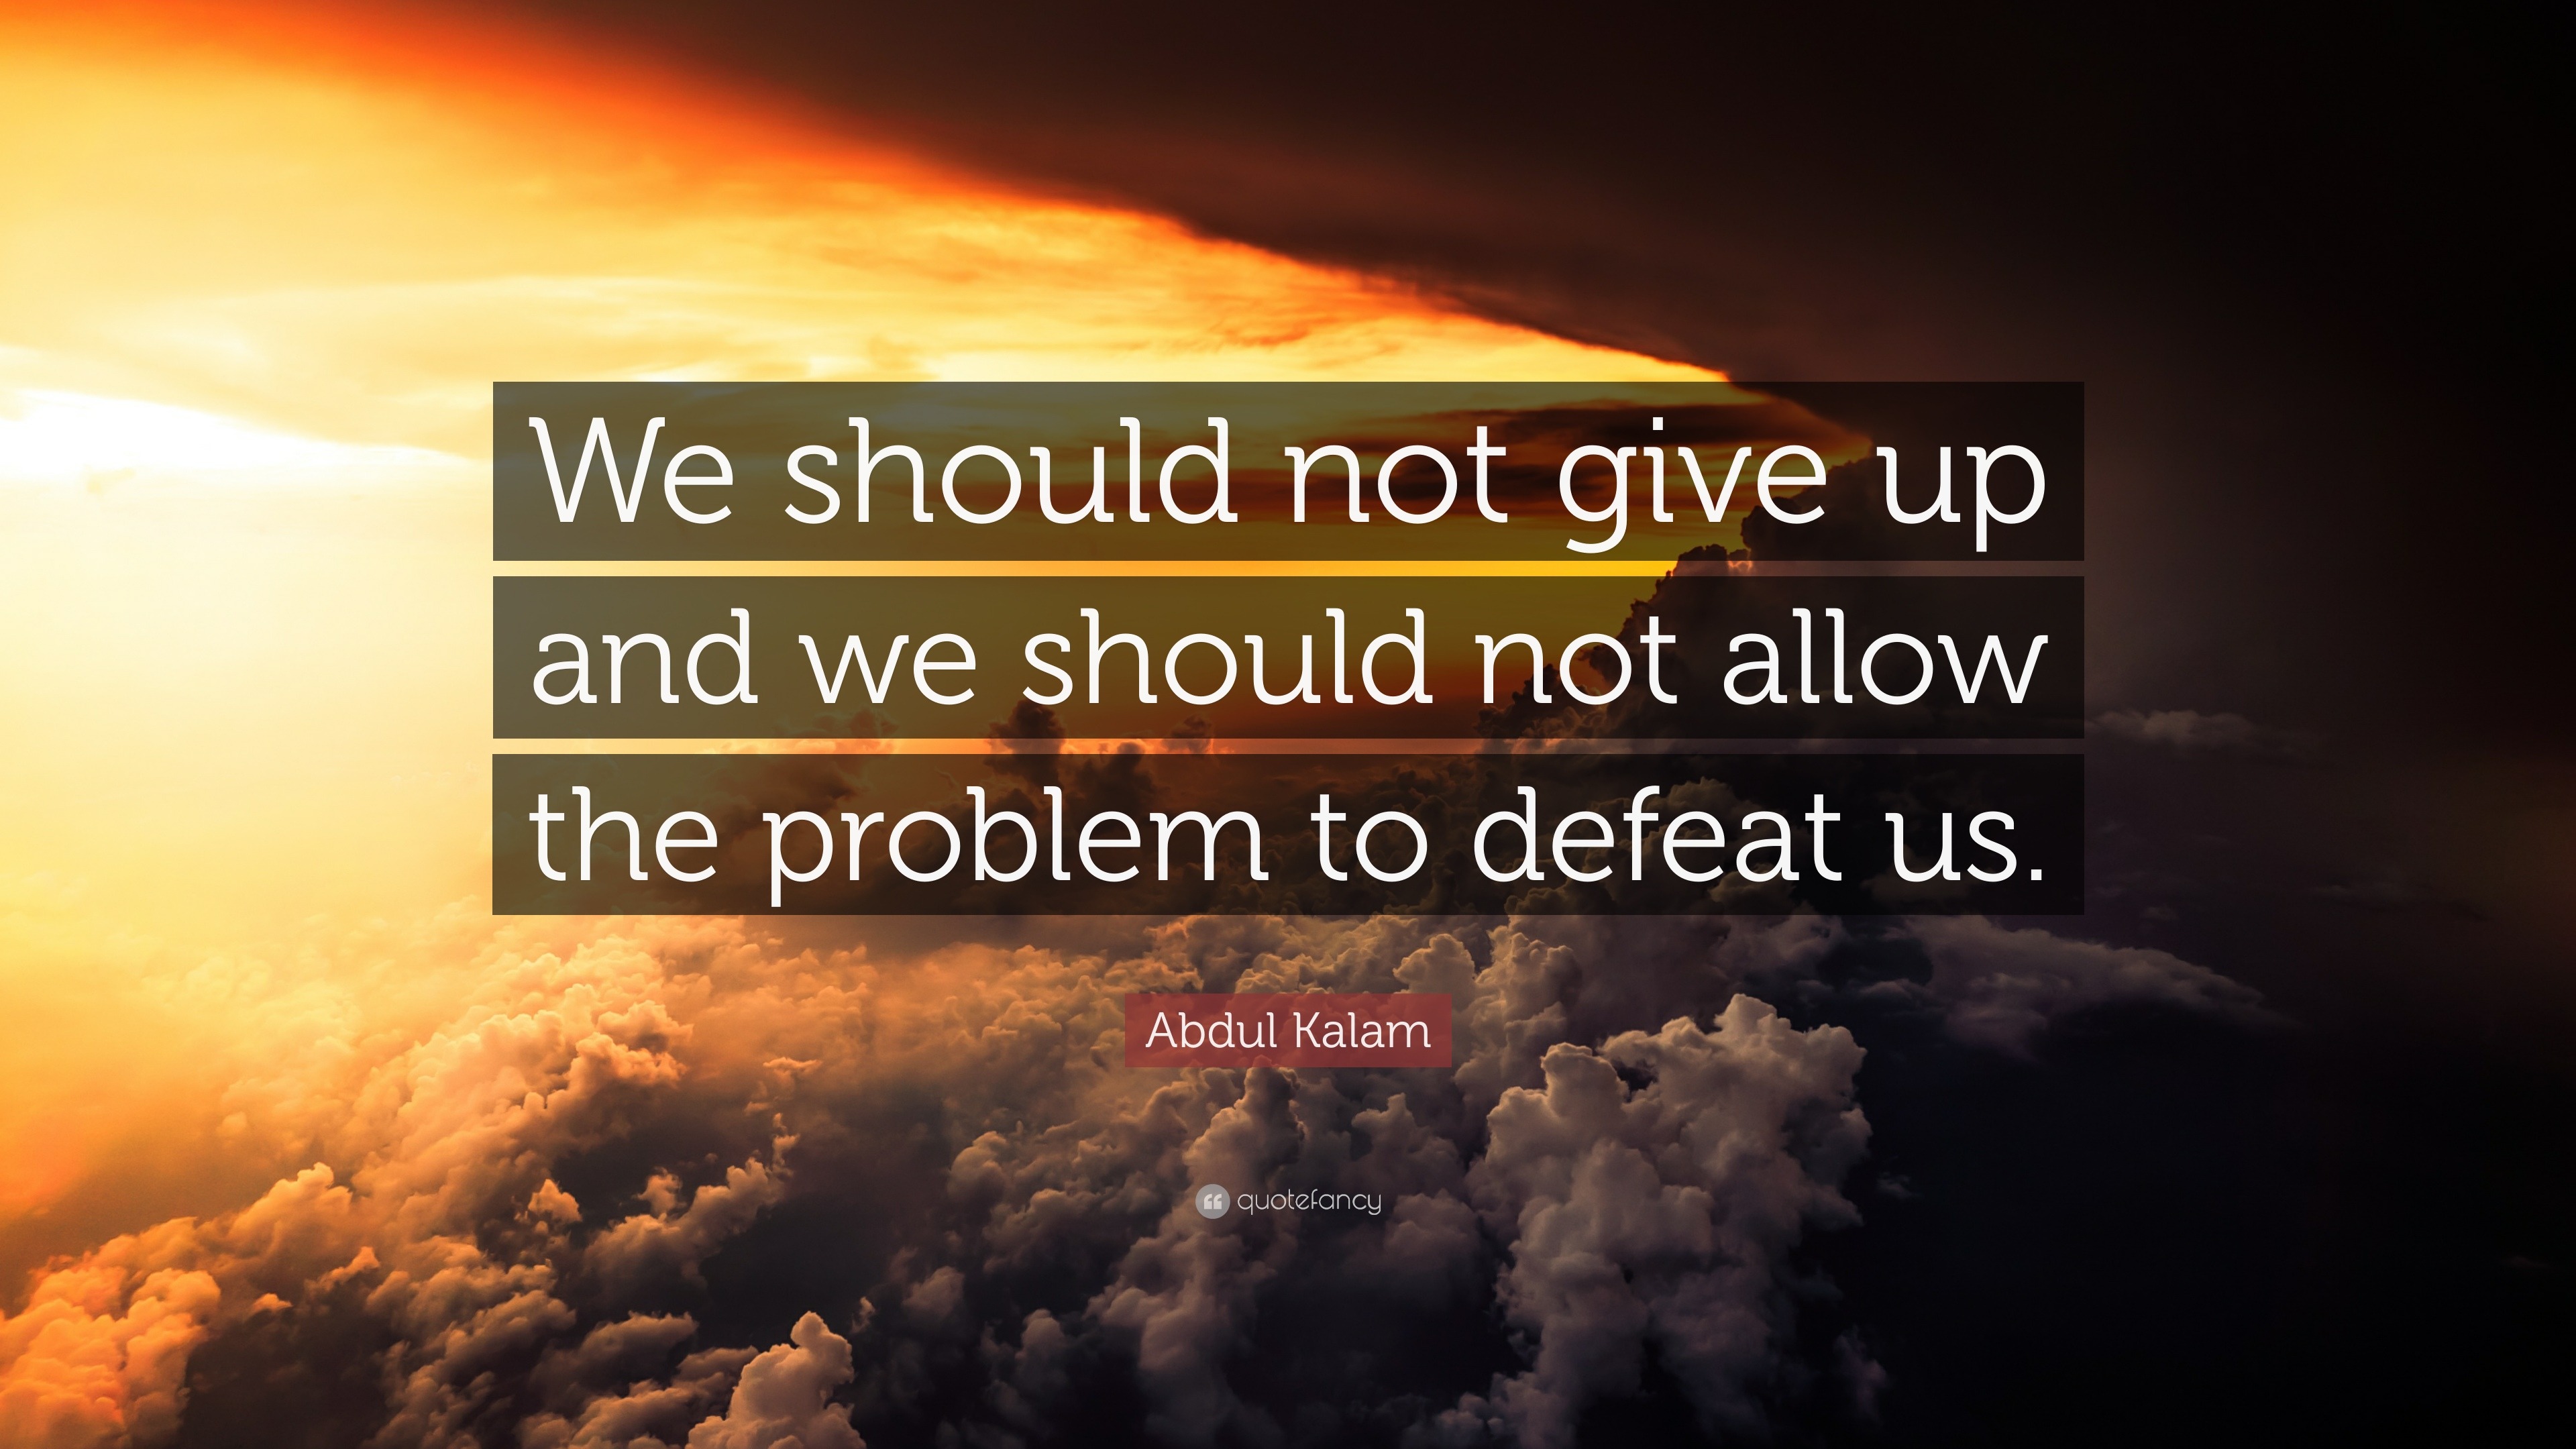 Abdul Kalam Quote: “We should not give up and we should not allow the